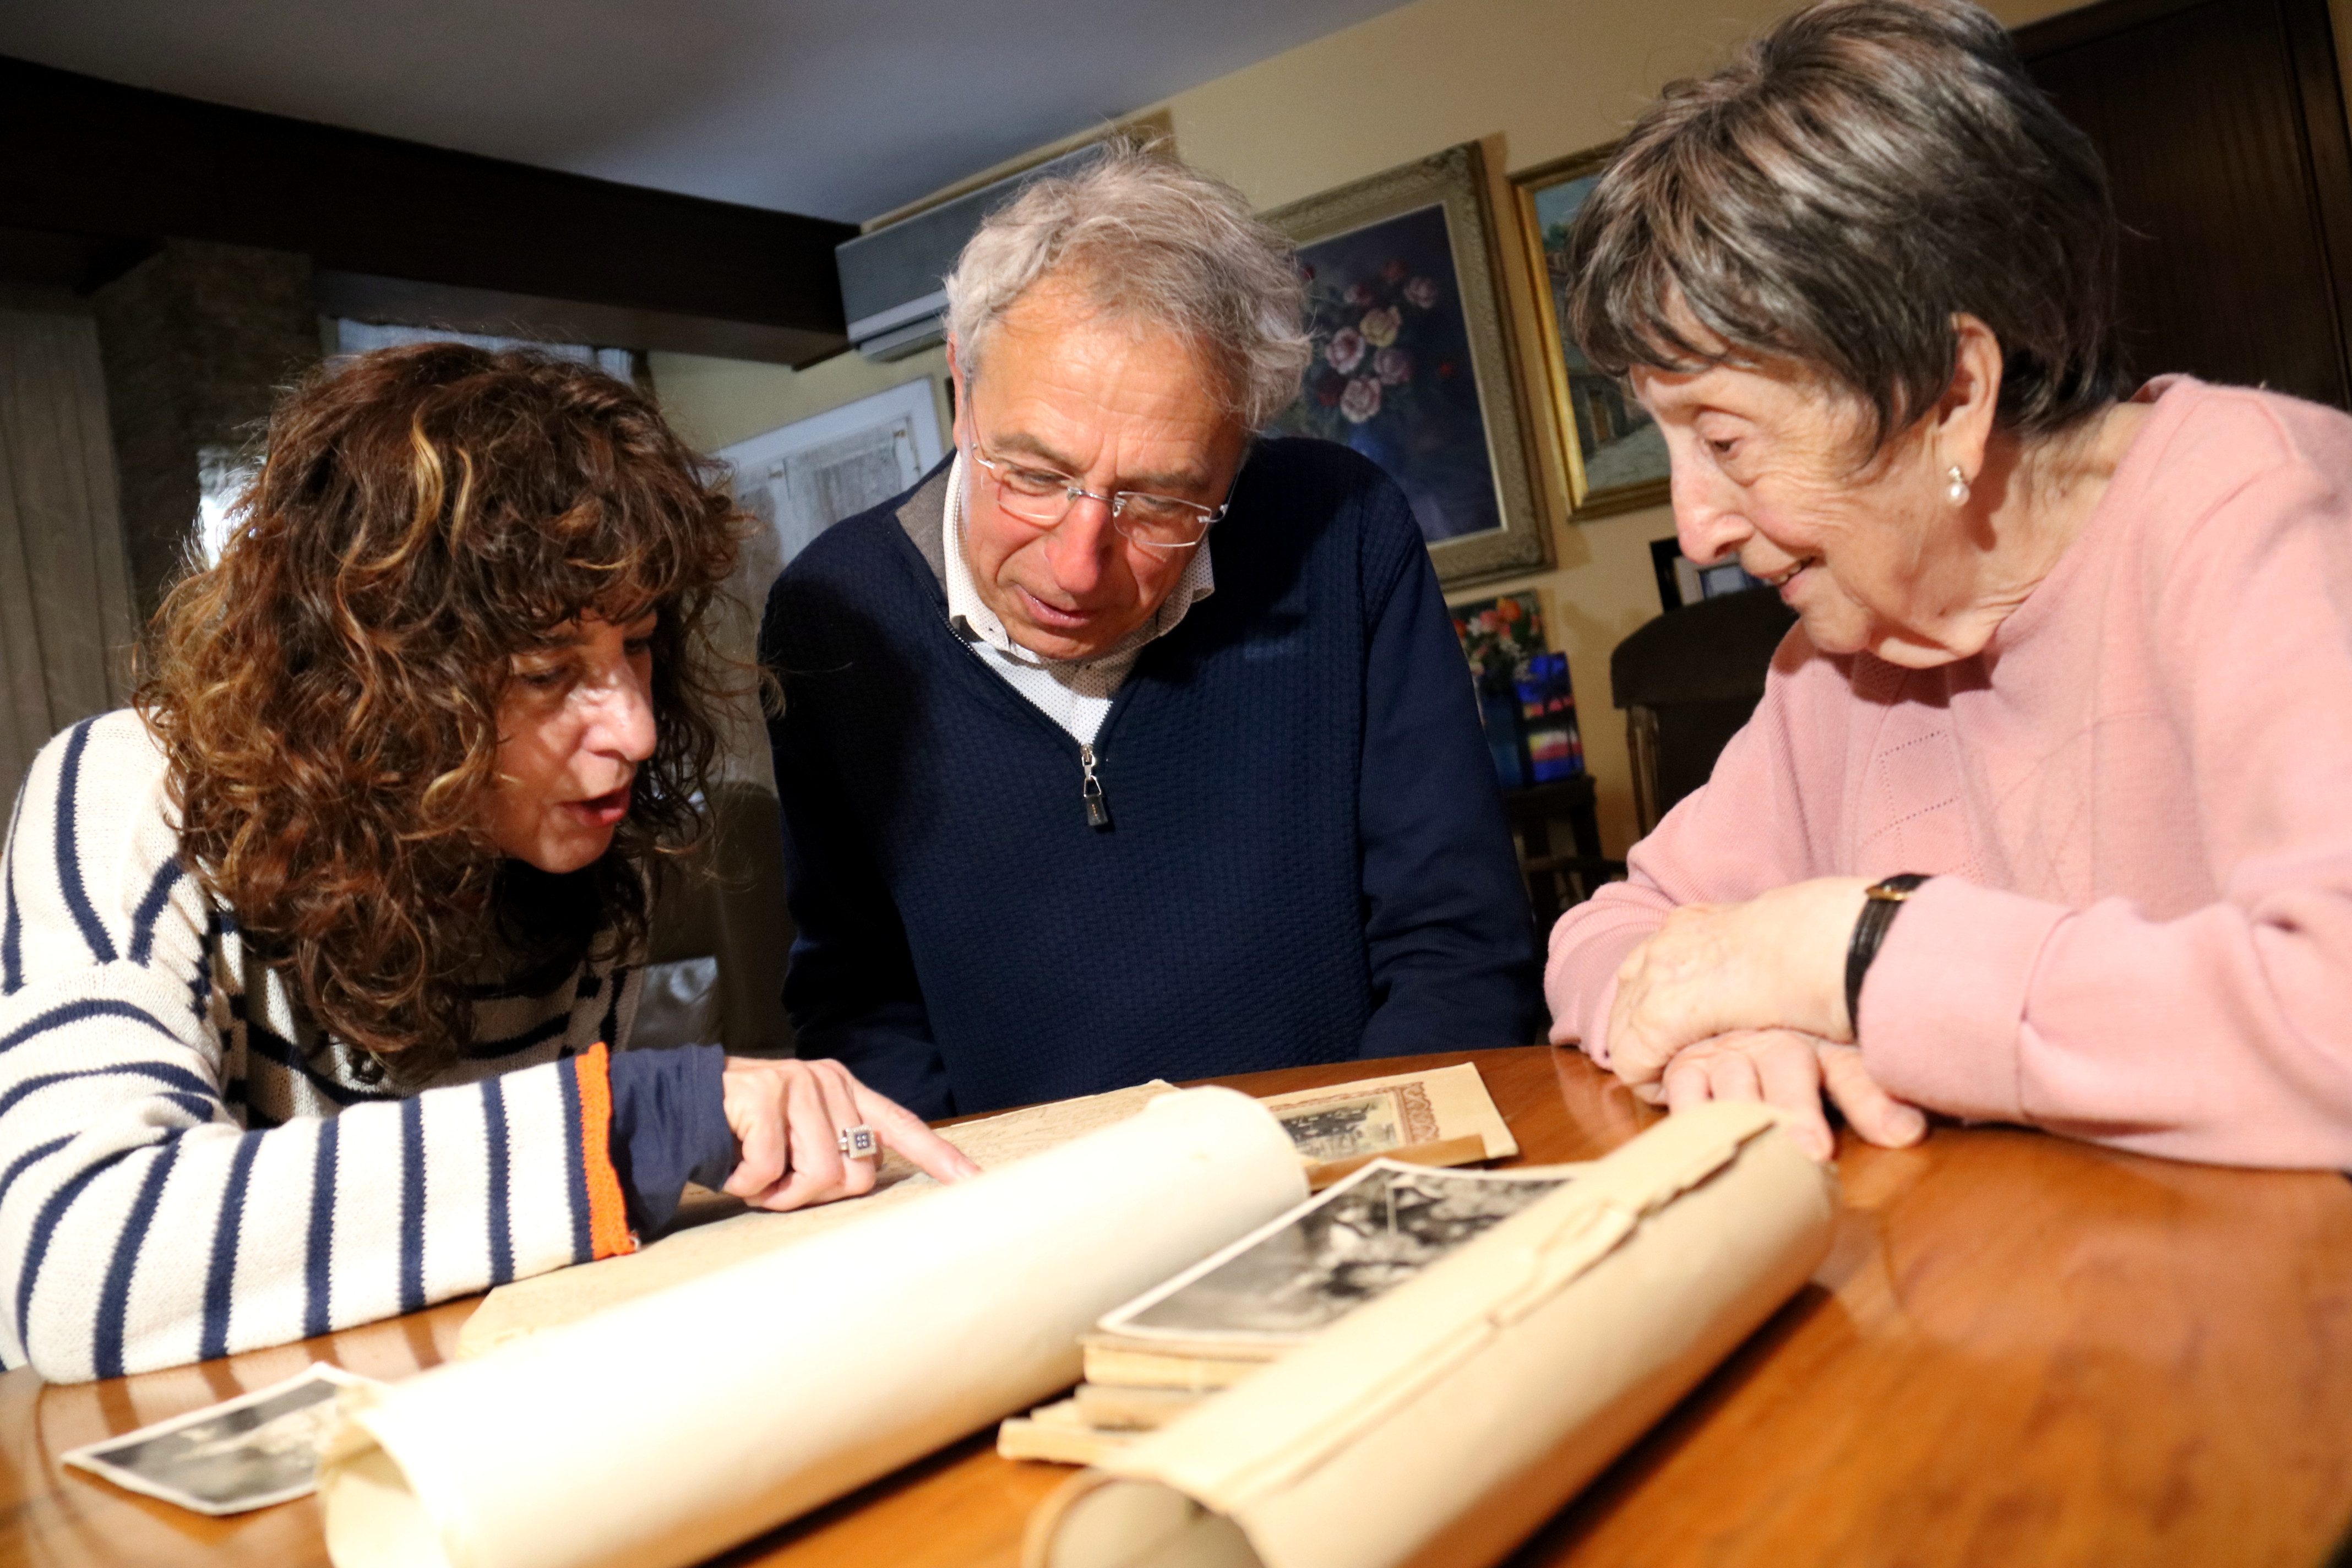 Rosario with her daughter, Dolors and Joasuim Aloy looking at historical pictures.